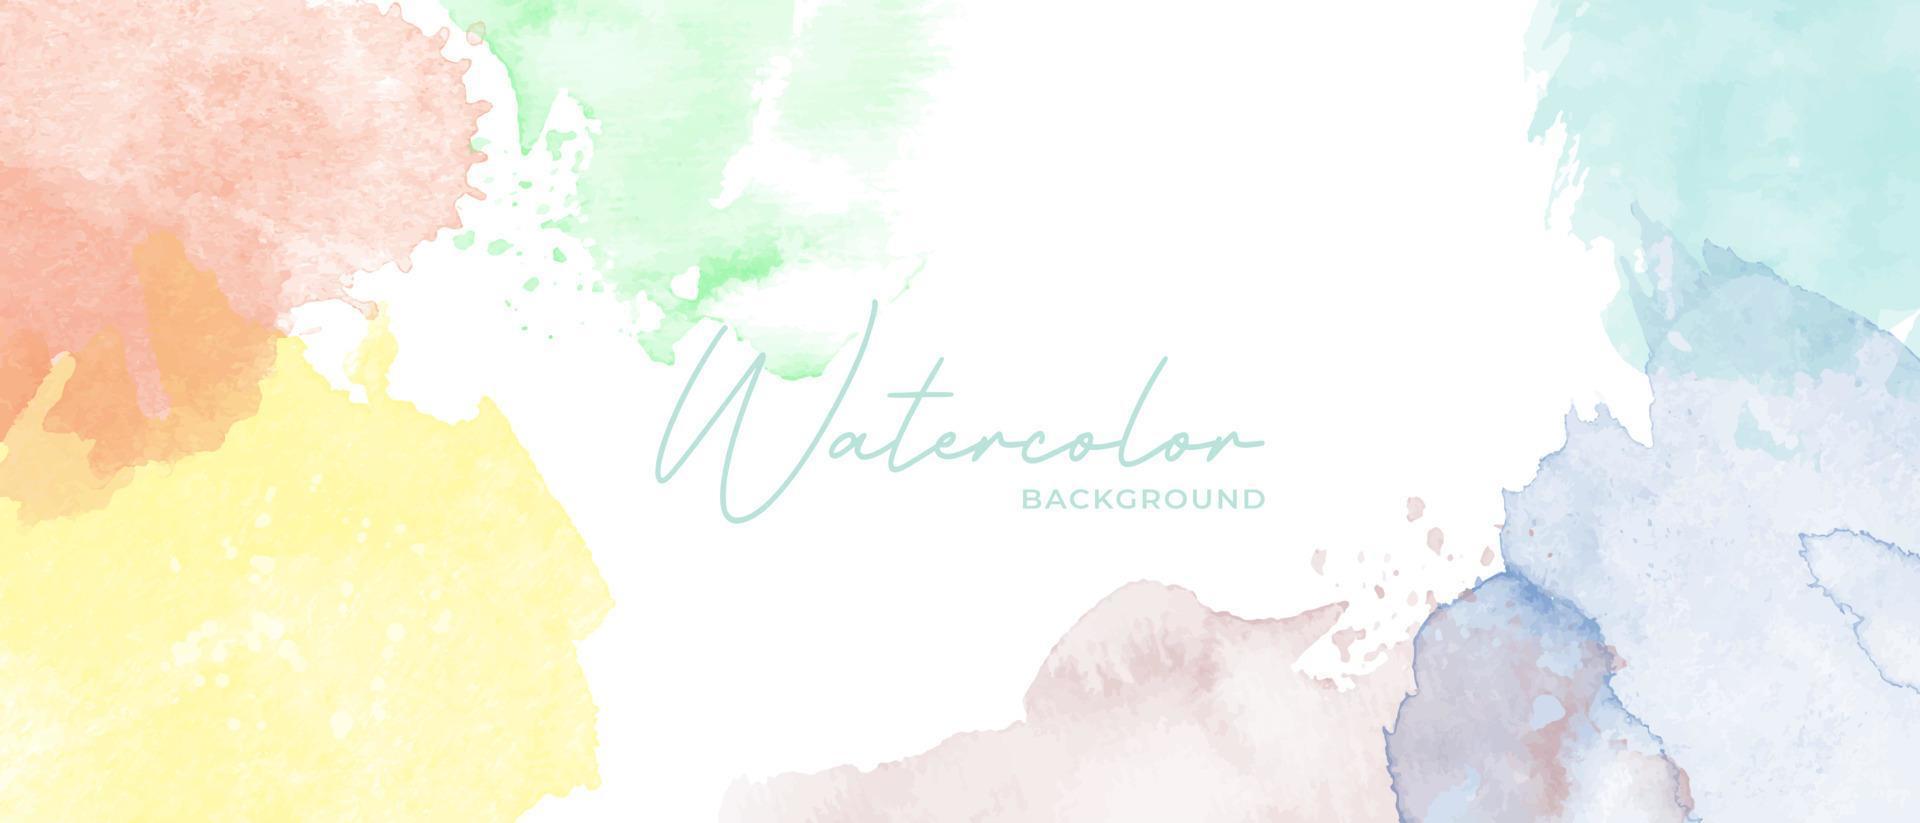 Minimal Hand Painted Pastel Watercolor Abstract Art Background Template Design Vector Illustration